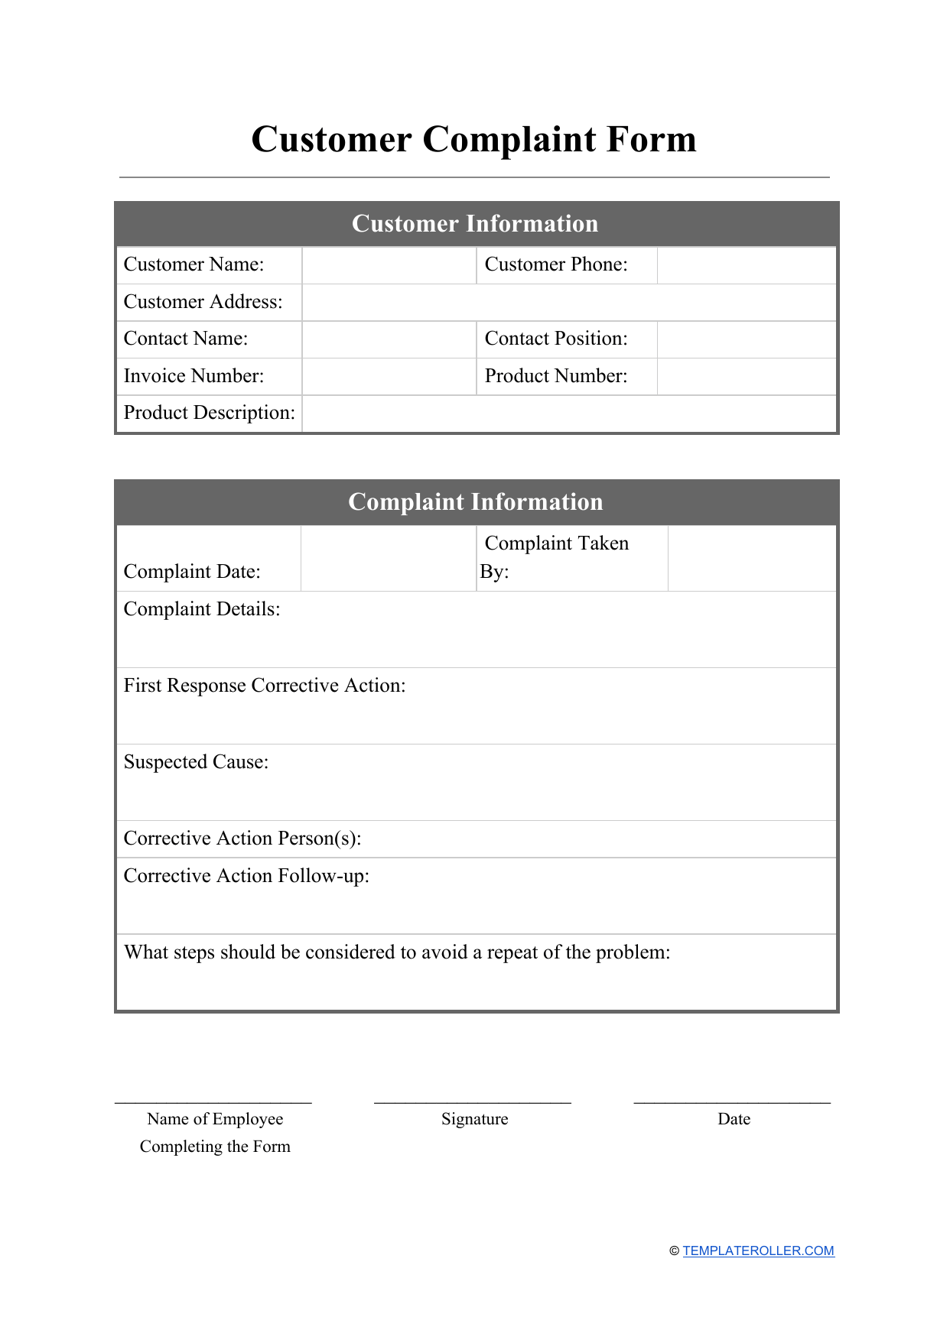 Customer Complaint Form, Page 1